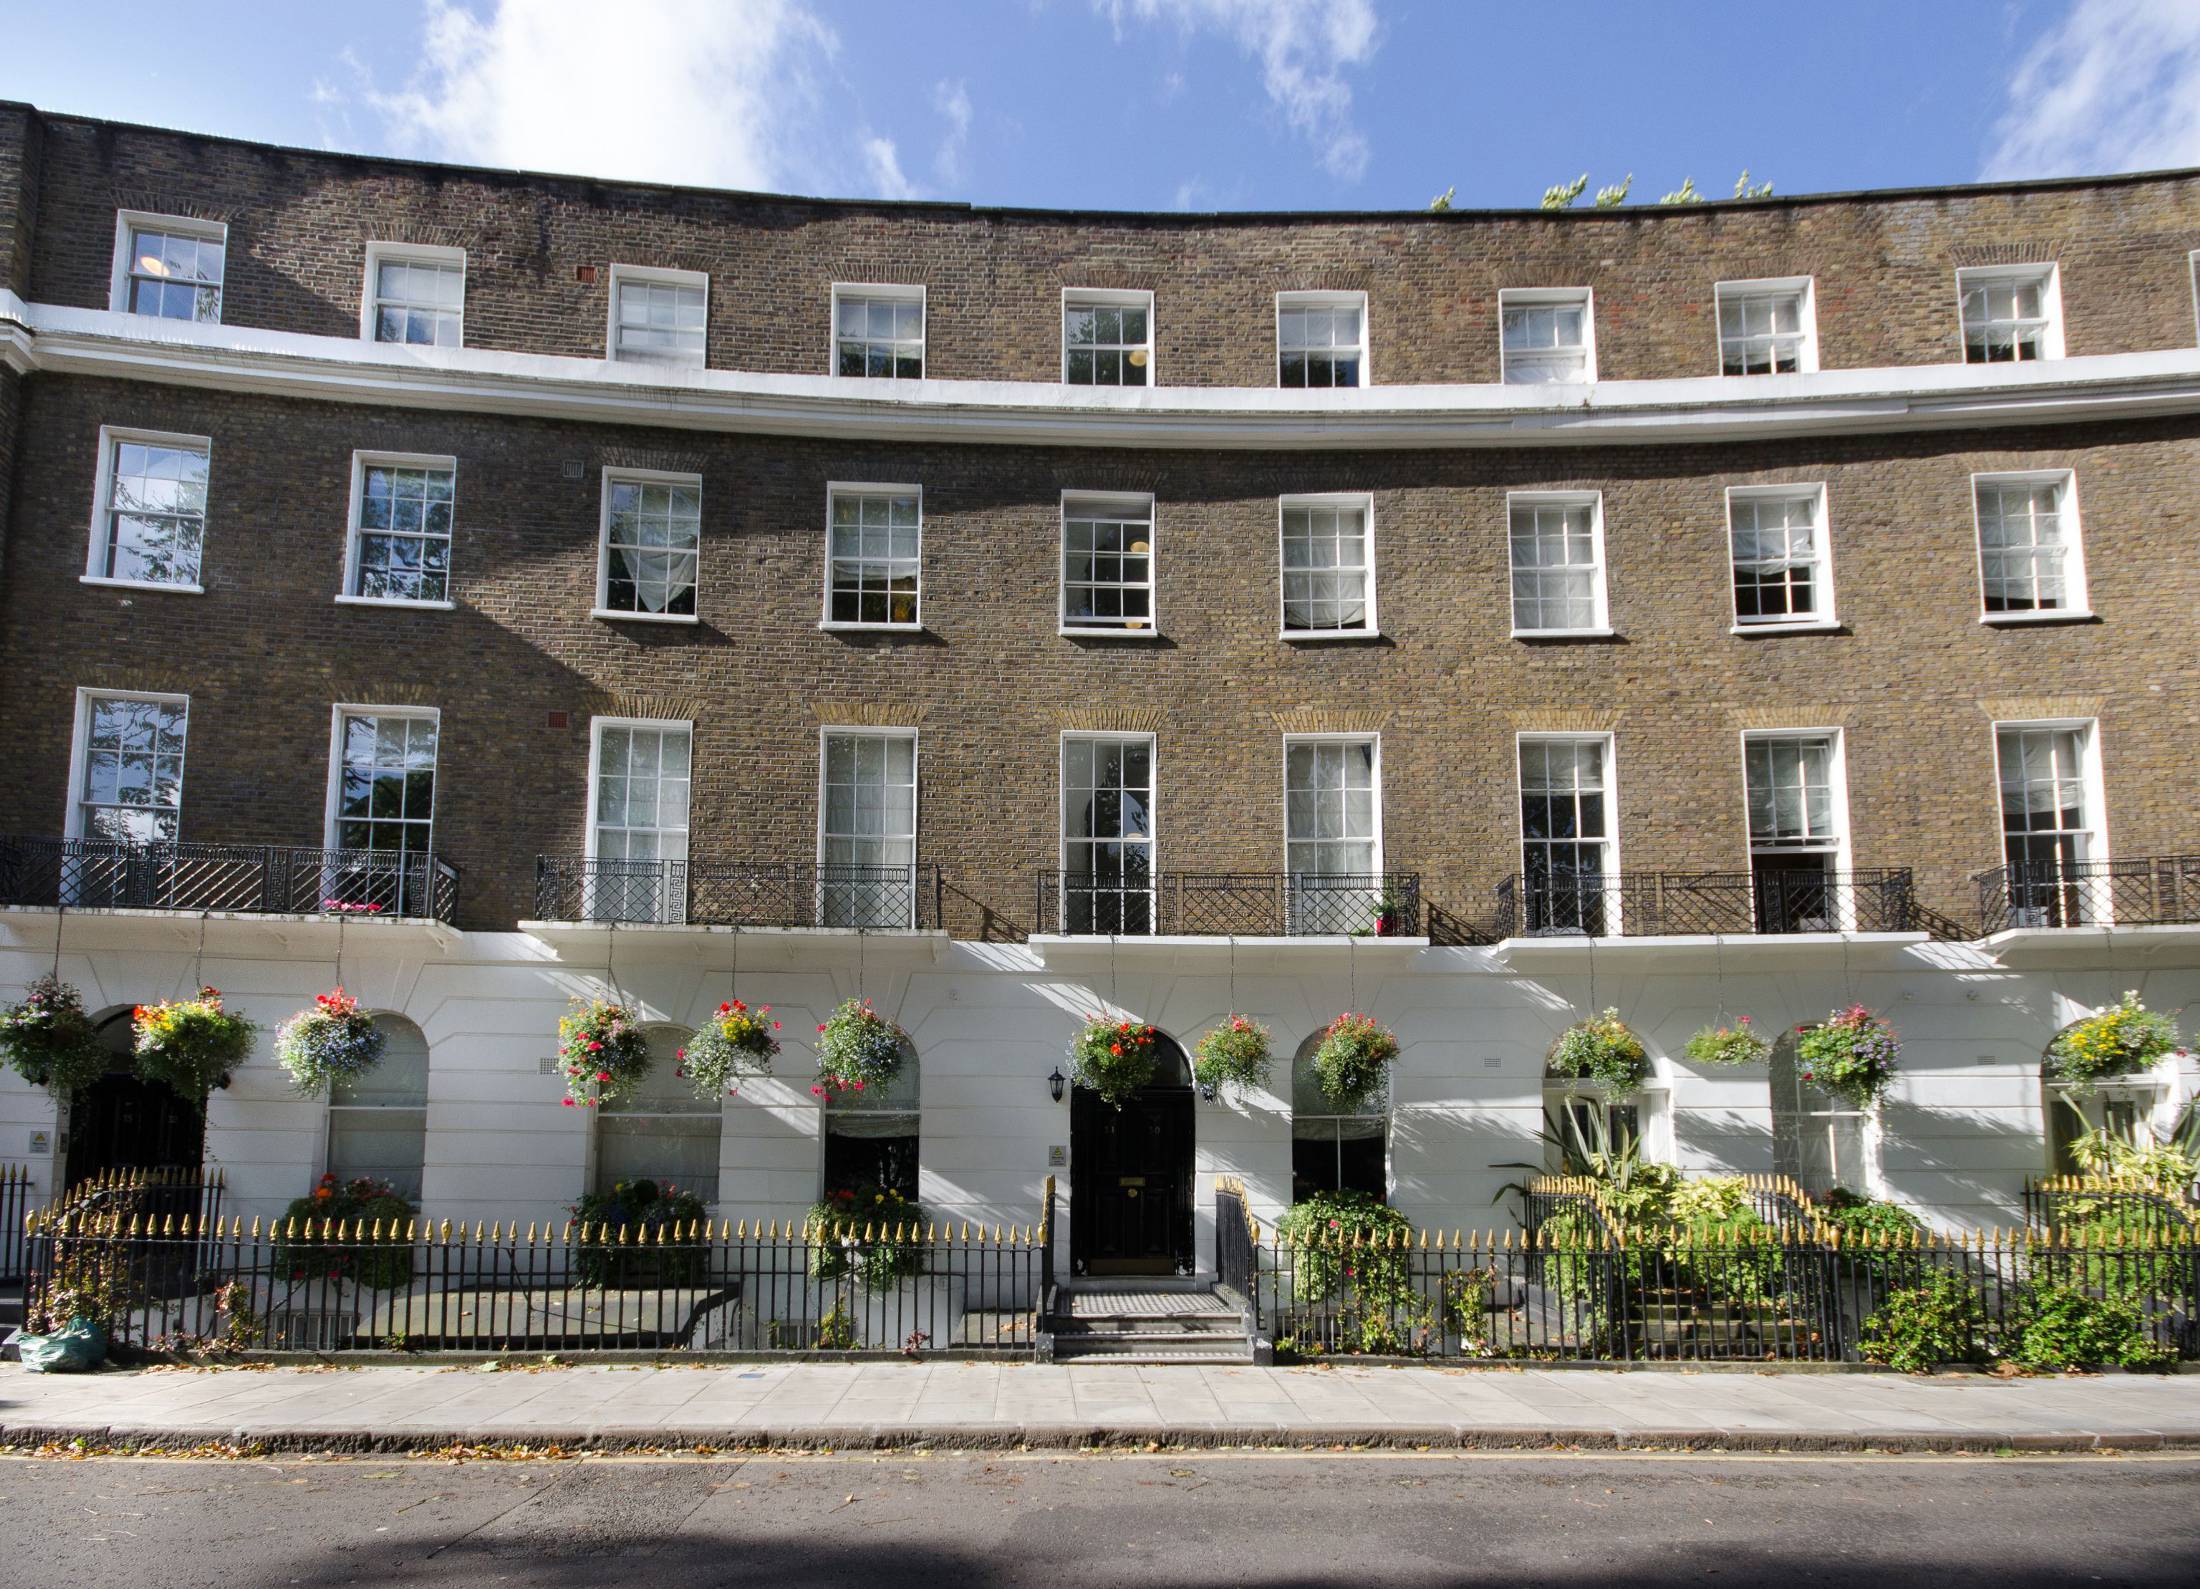 The Complete Guide to Renting a Flat in London in 2021 - Renting in Bloomsbury